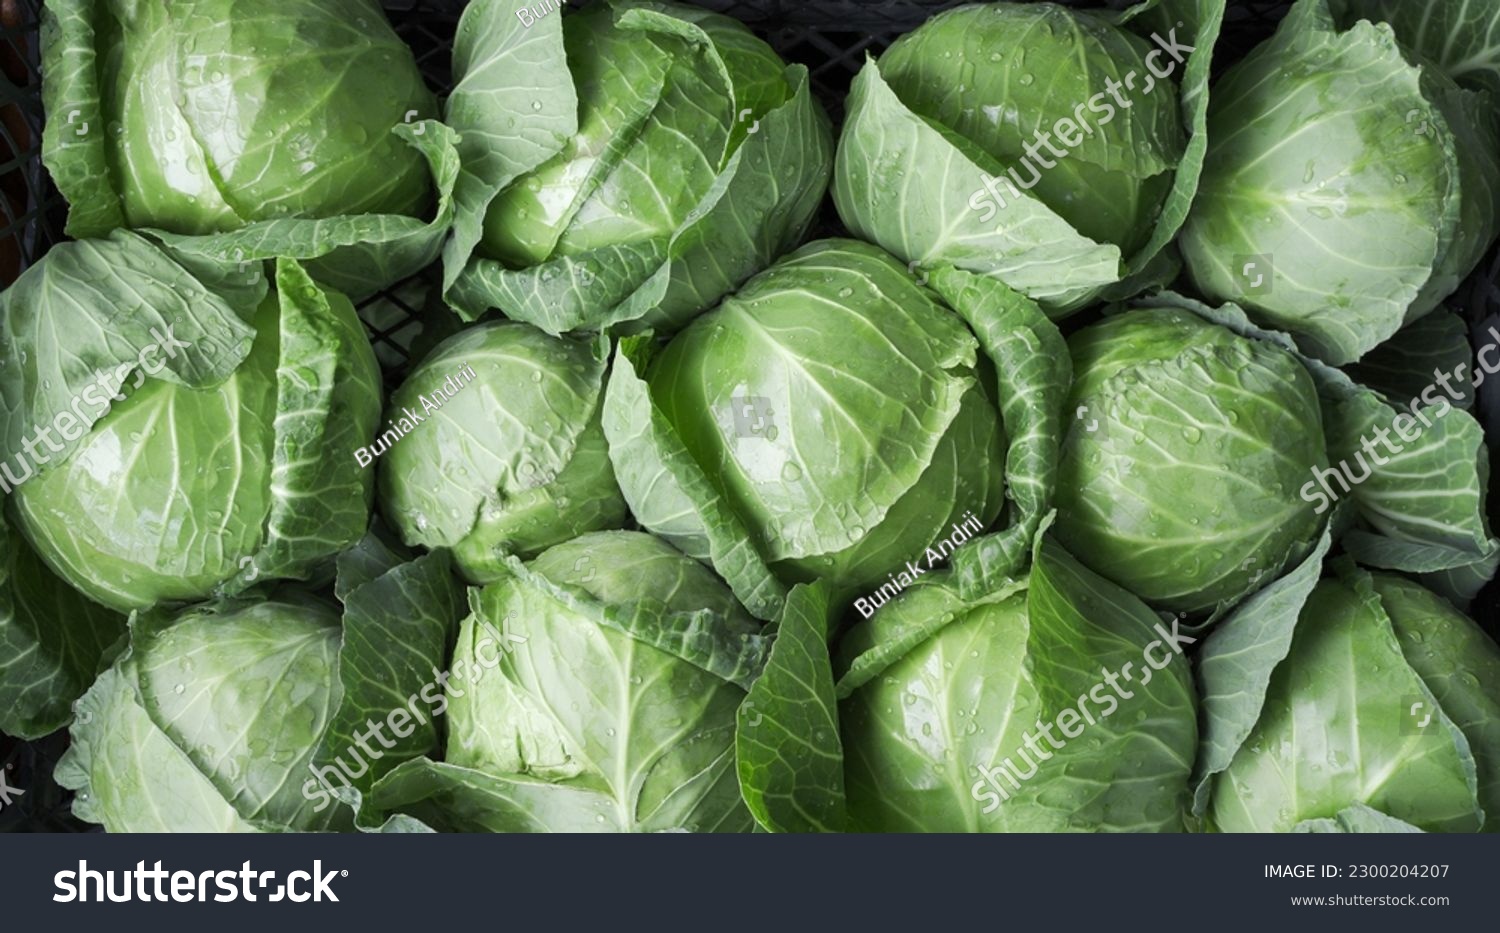 background of ripe early cabbage, top view. green cabbage in the market.                           #2300204207